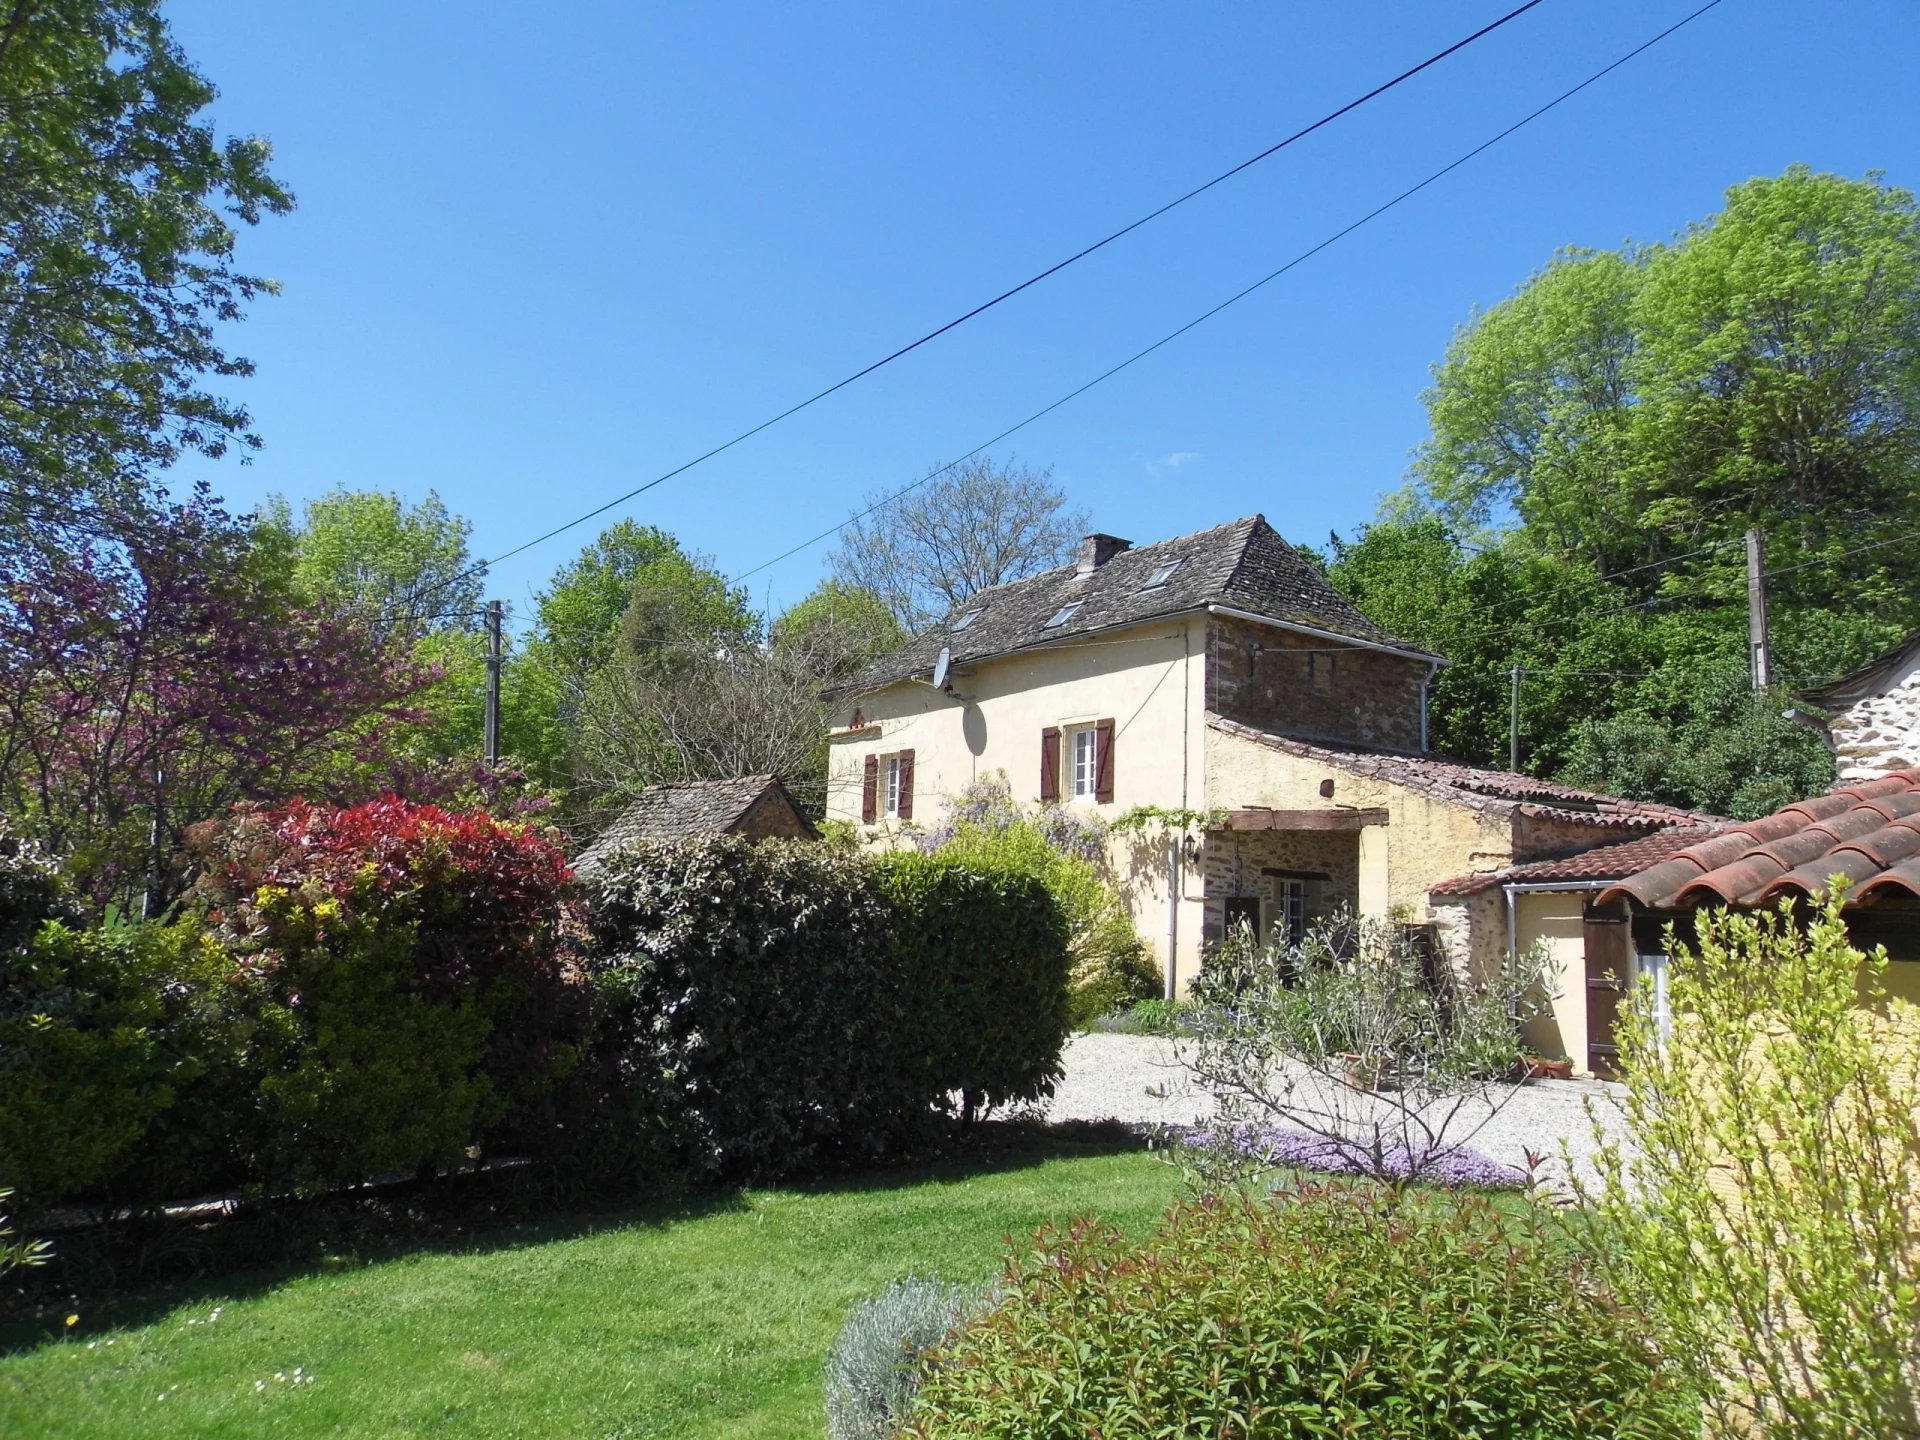 Country house plus 2 gites, pool and views to die for